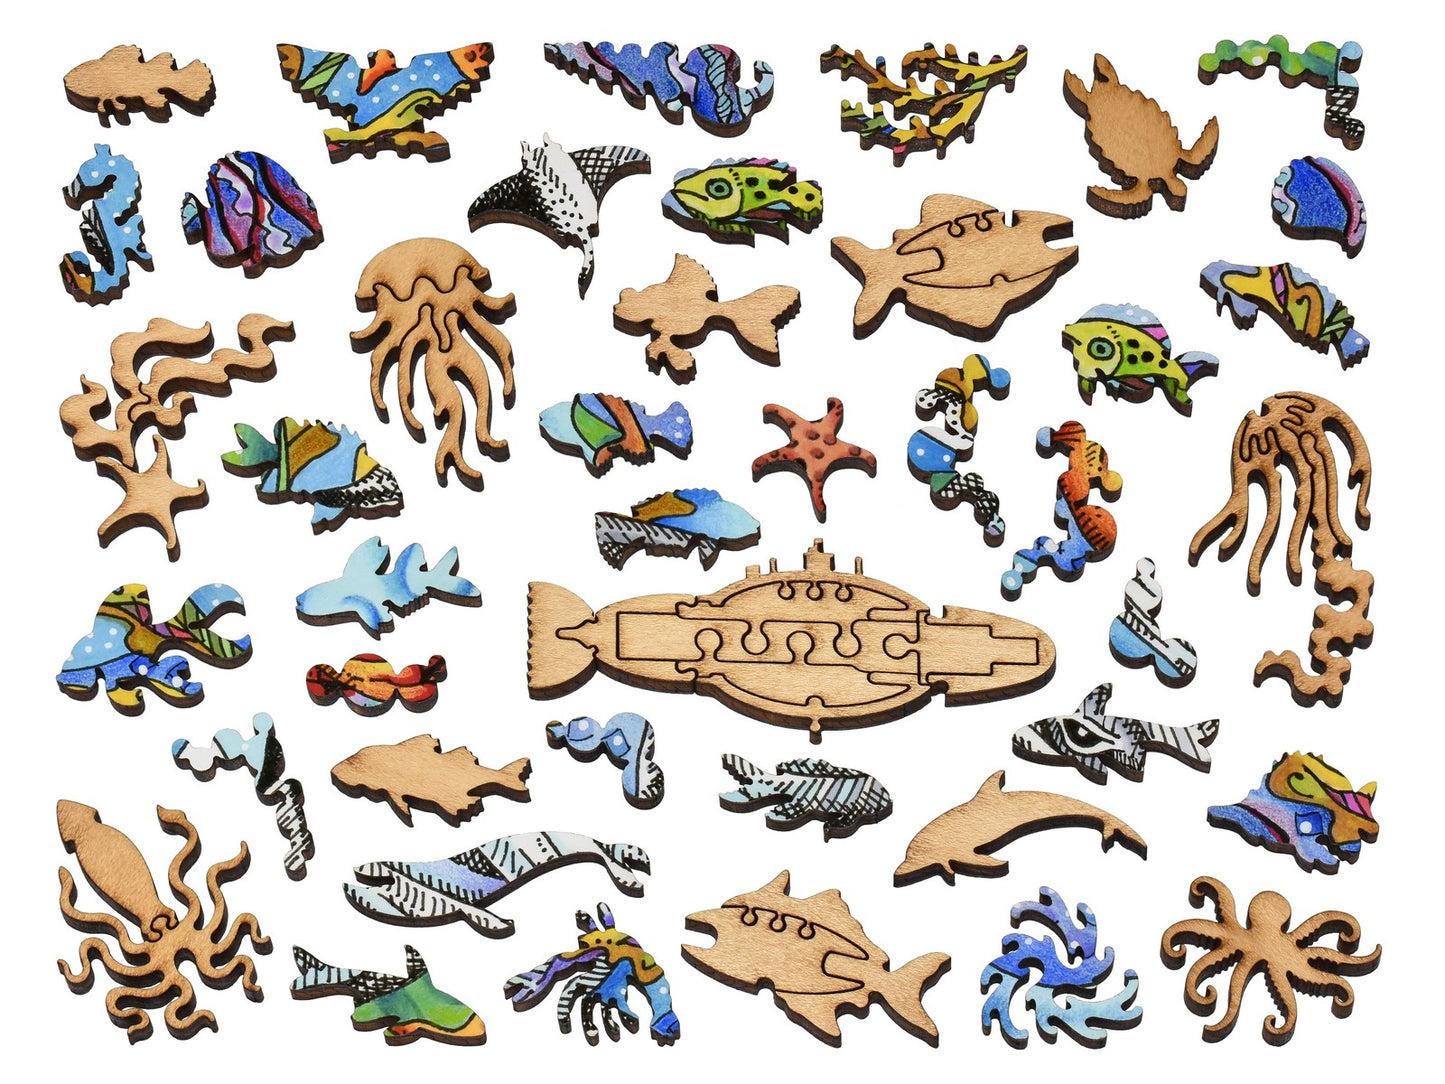 The whimsies that can be found in the puzzle, Under the Sea.